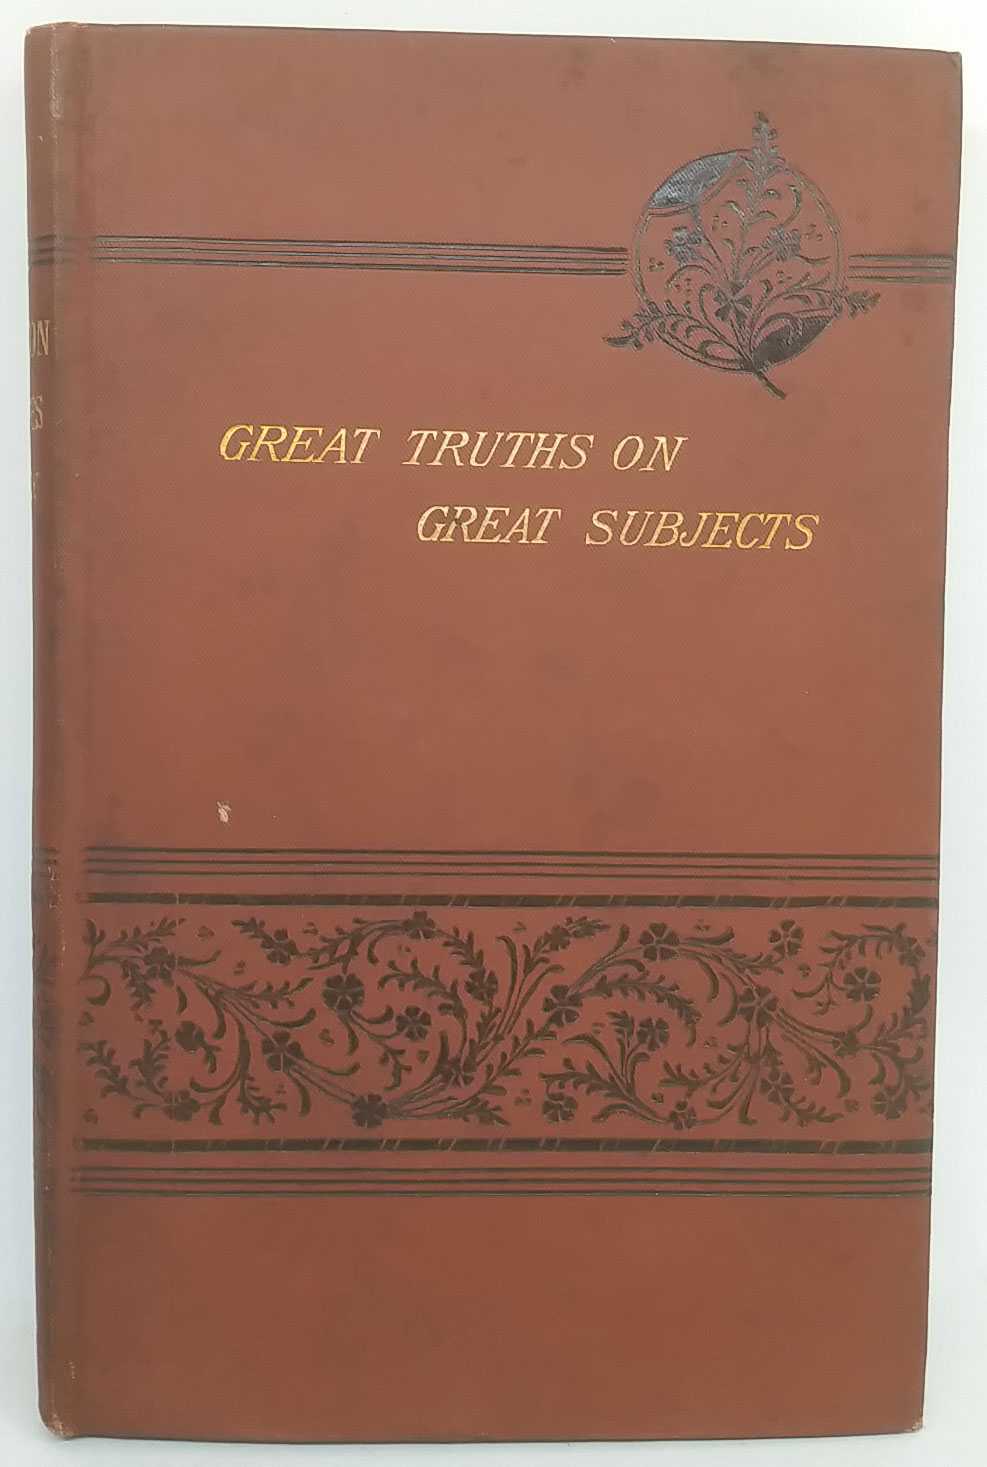 Jonathan Bayley - Great Truths on Great Subjects: Six Lectures Delivered at Brighton